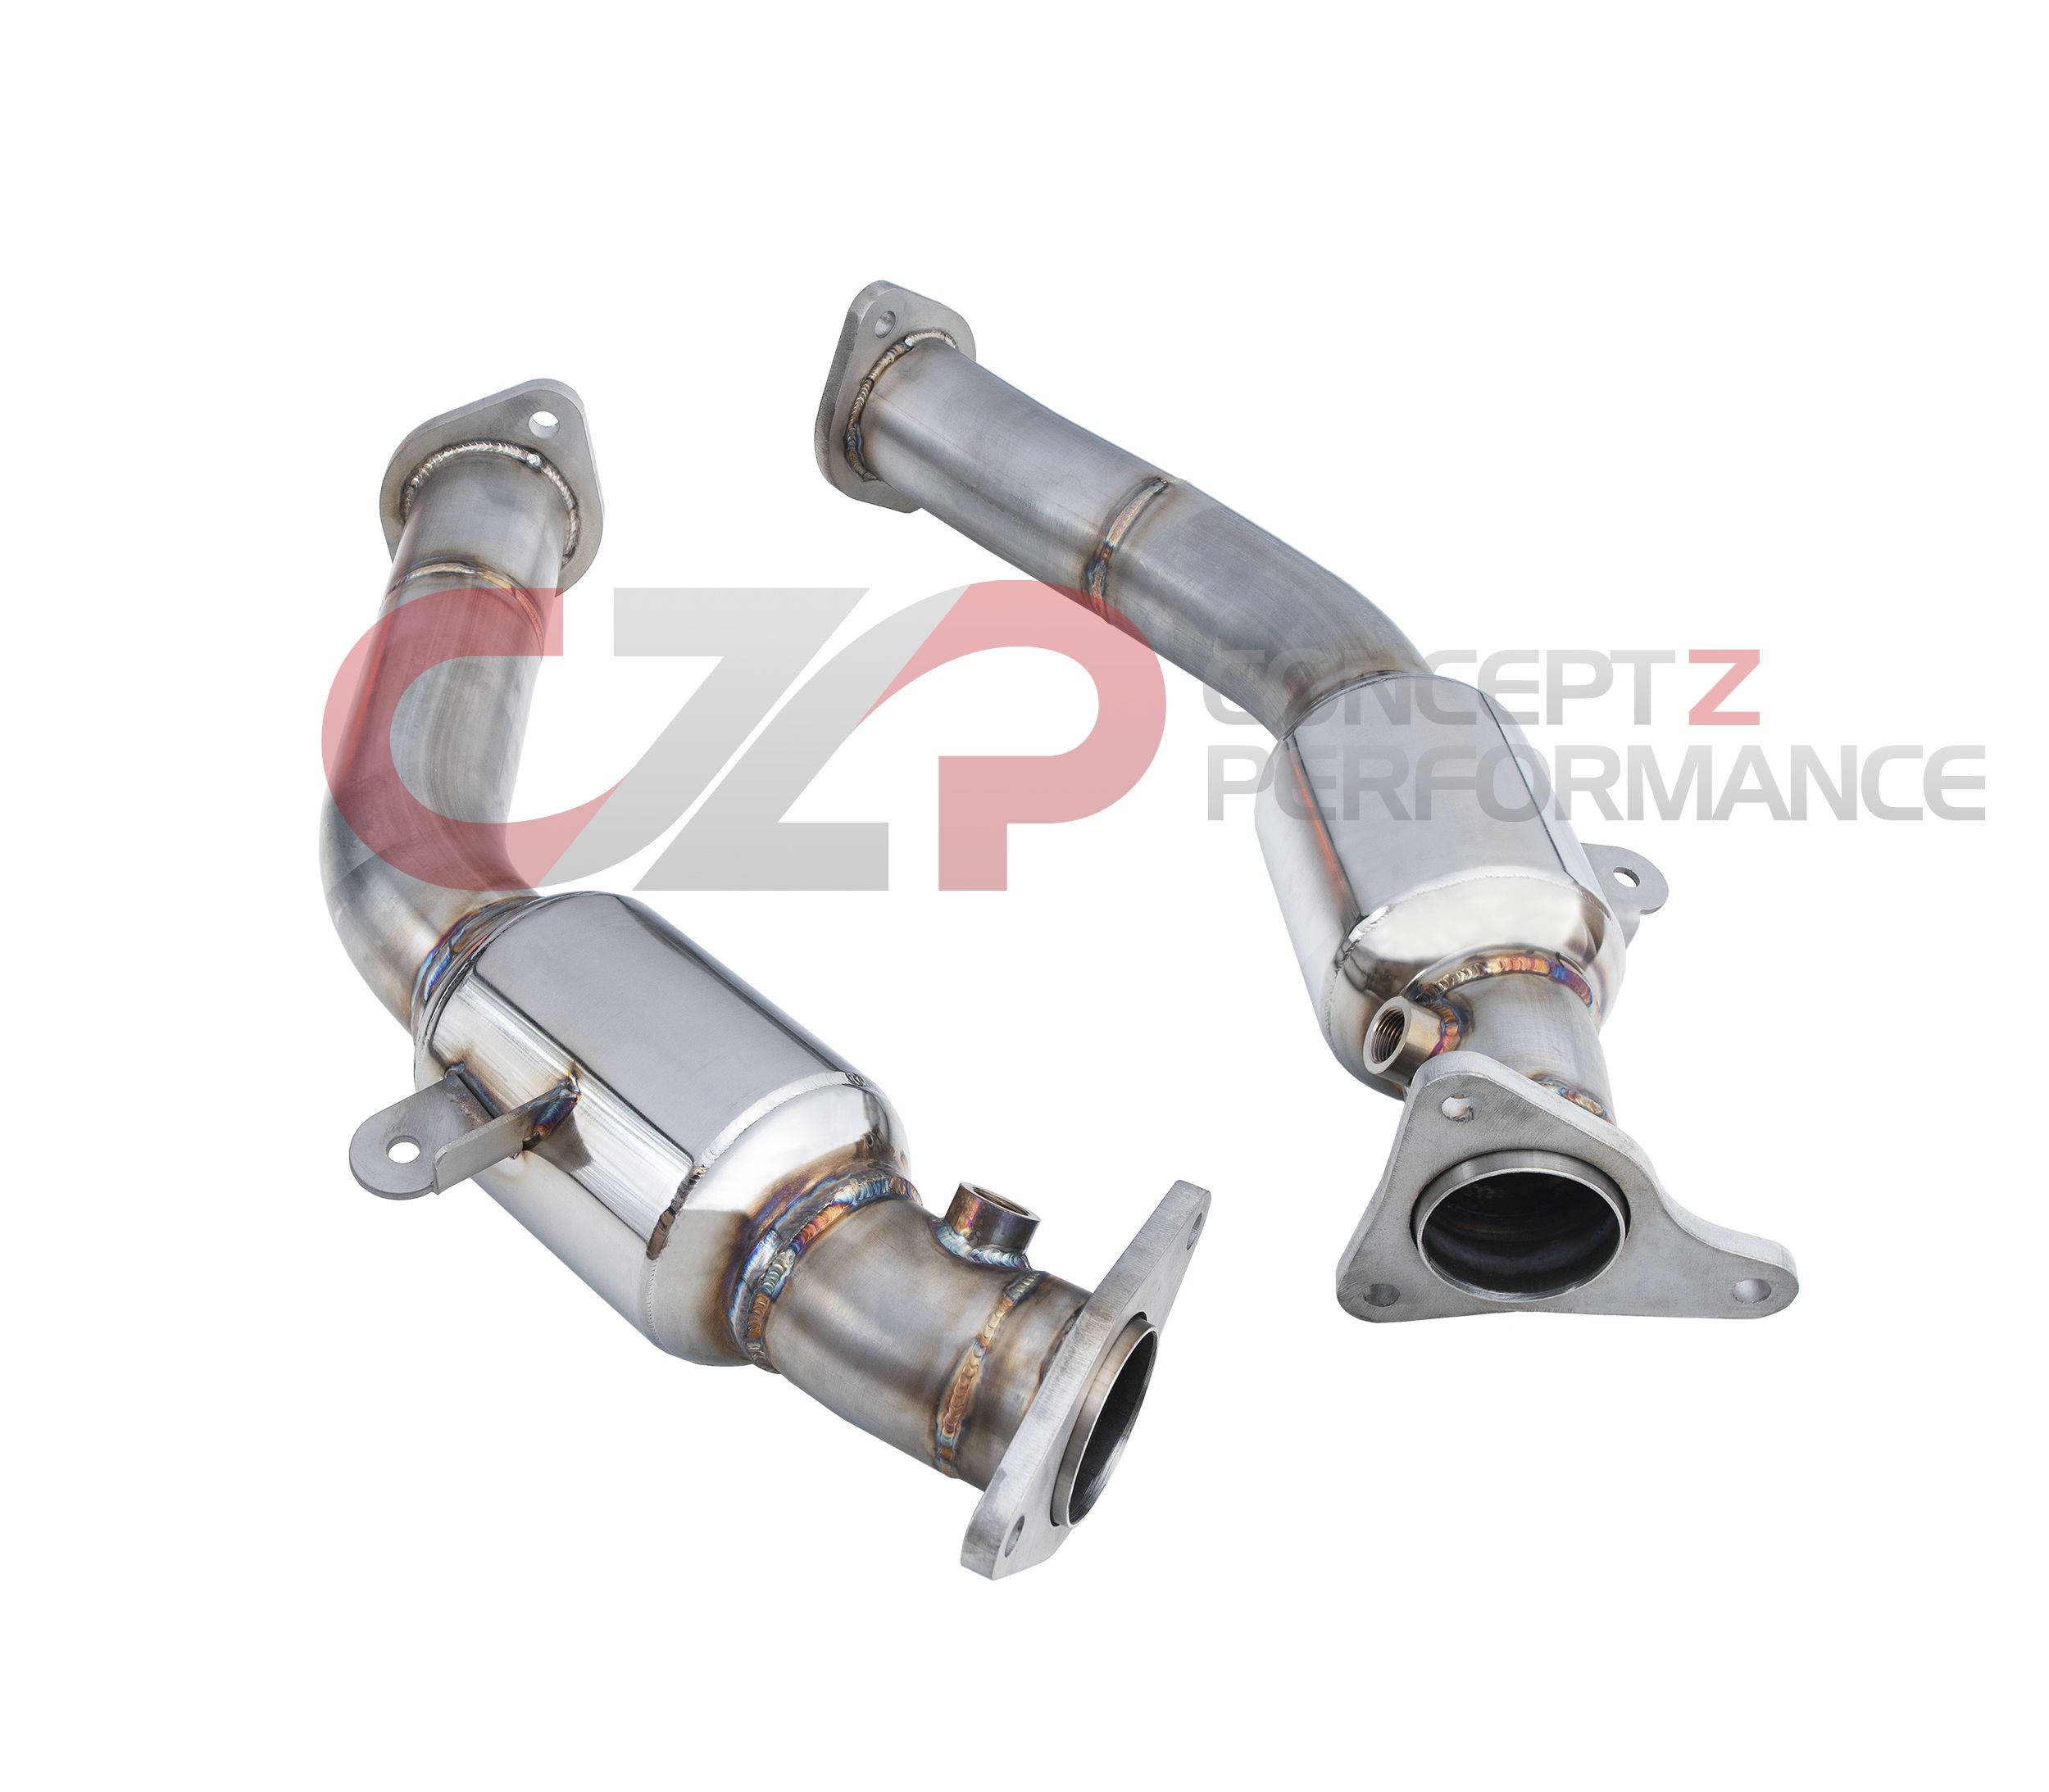 CZP by PPE Stainless Steel Lower Downpipes, 2.5" Resonated - Nissan Z / Infiniti Q50, Q60 3.0t VR30DDTT